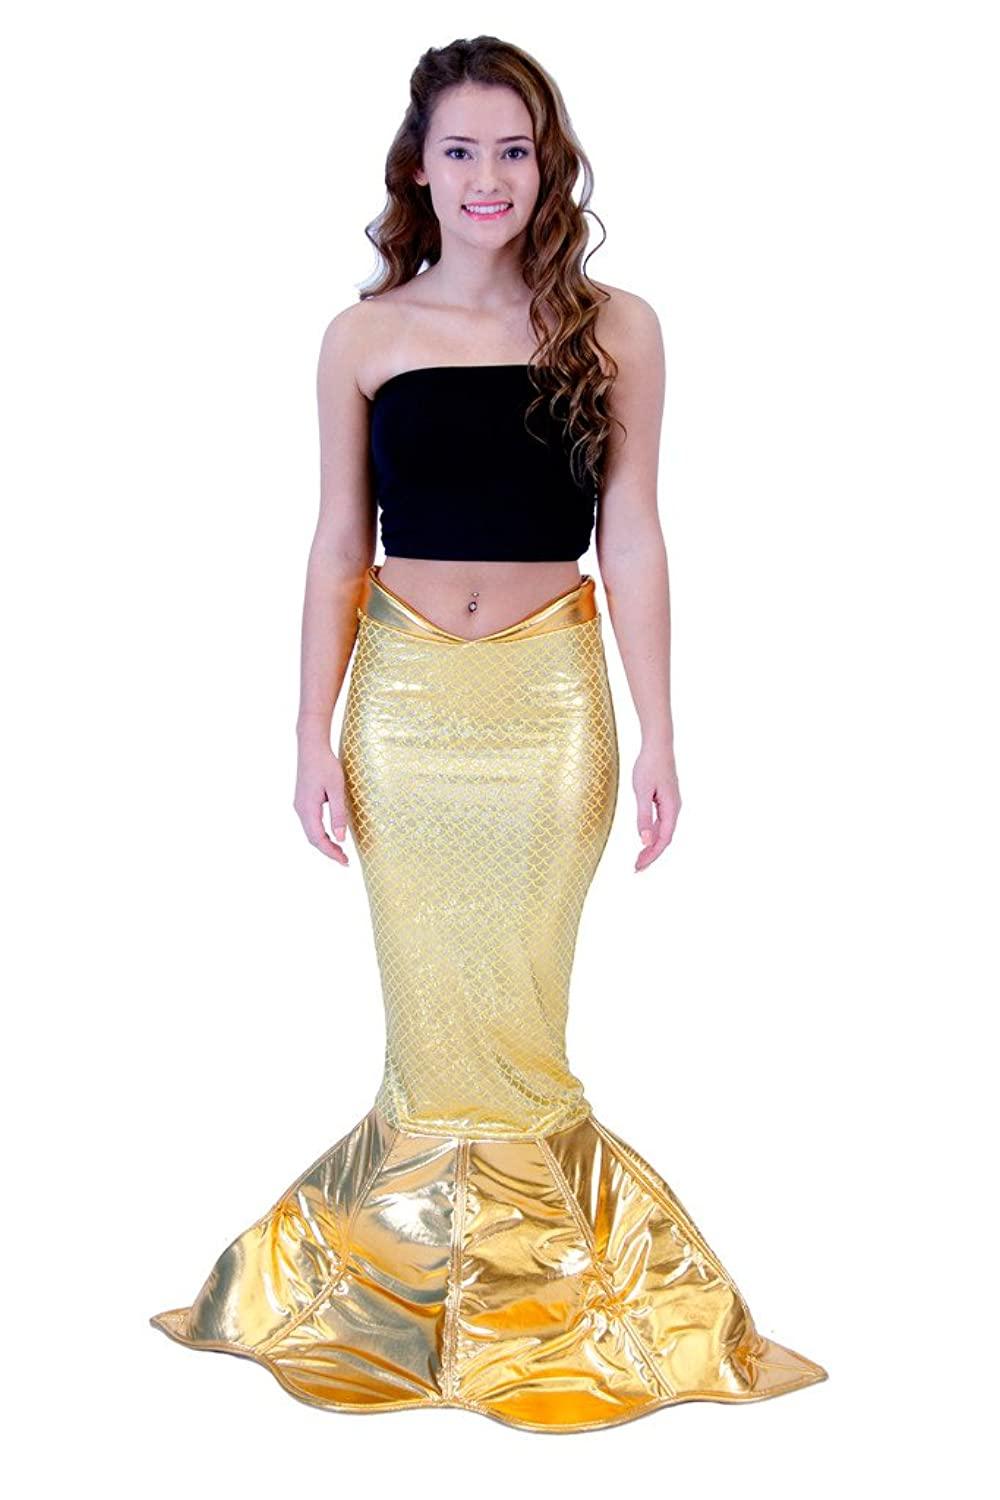 Magical Mermaid Sparkle Tail DELUXE Costume - TVStoreOnline